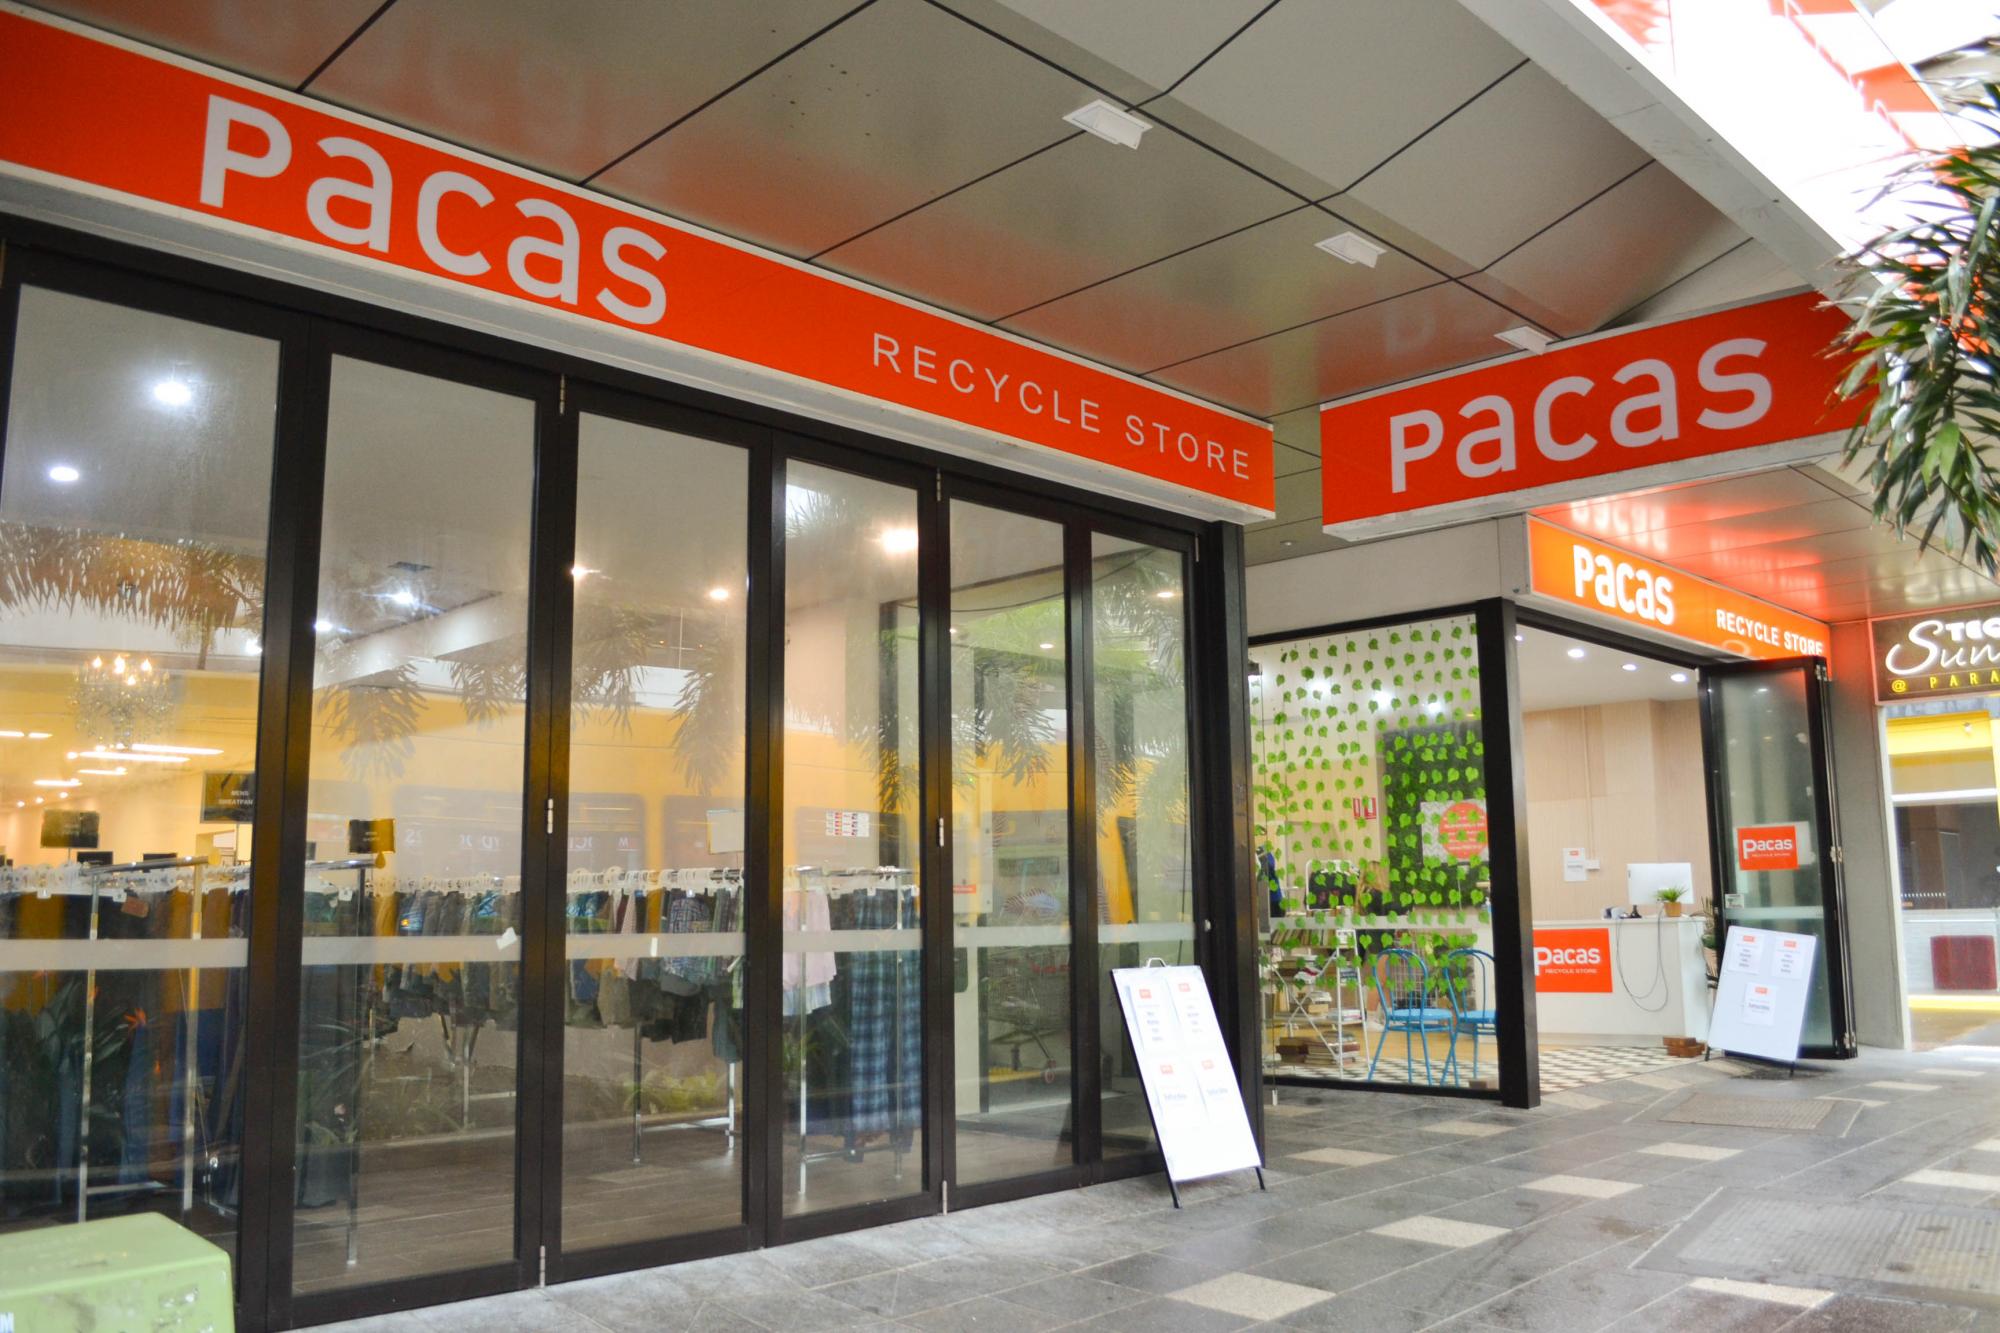 Pacas Recycling Store - Paradise Thrift Store - Inside Gold Coast